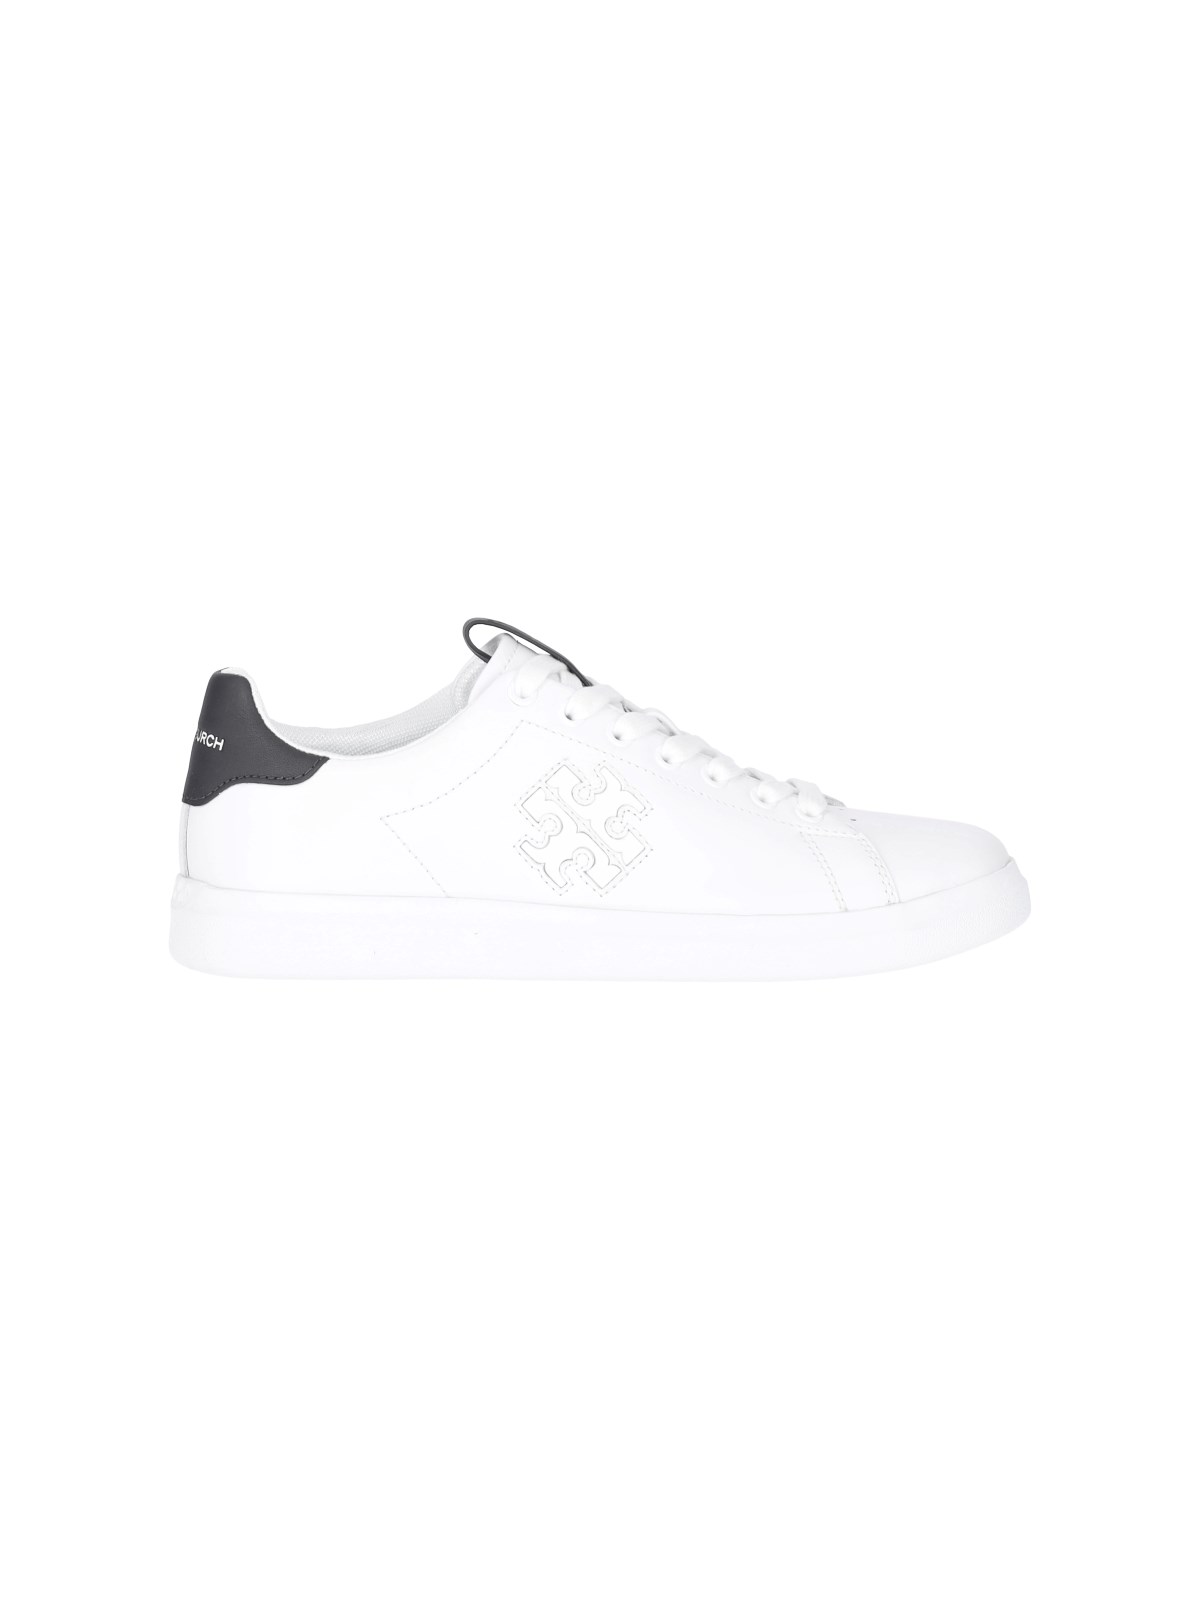 Shop Tory Burch "howell" Sneakers In White